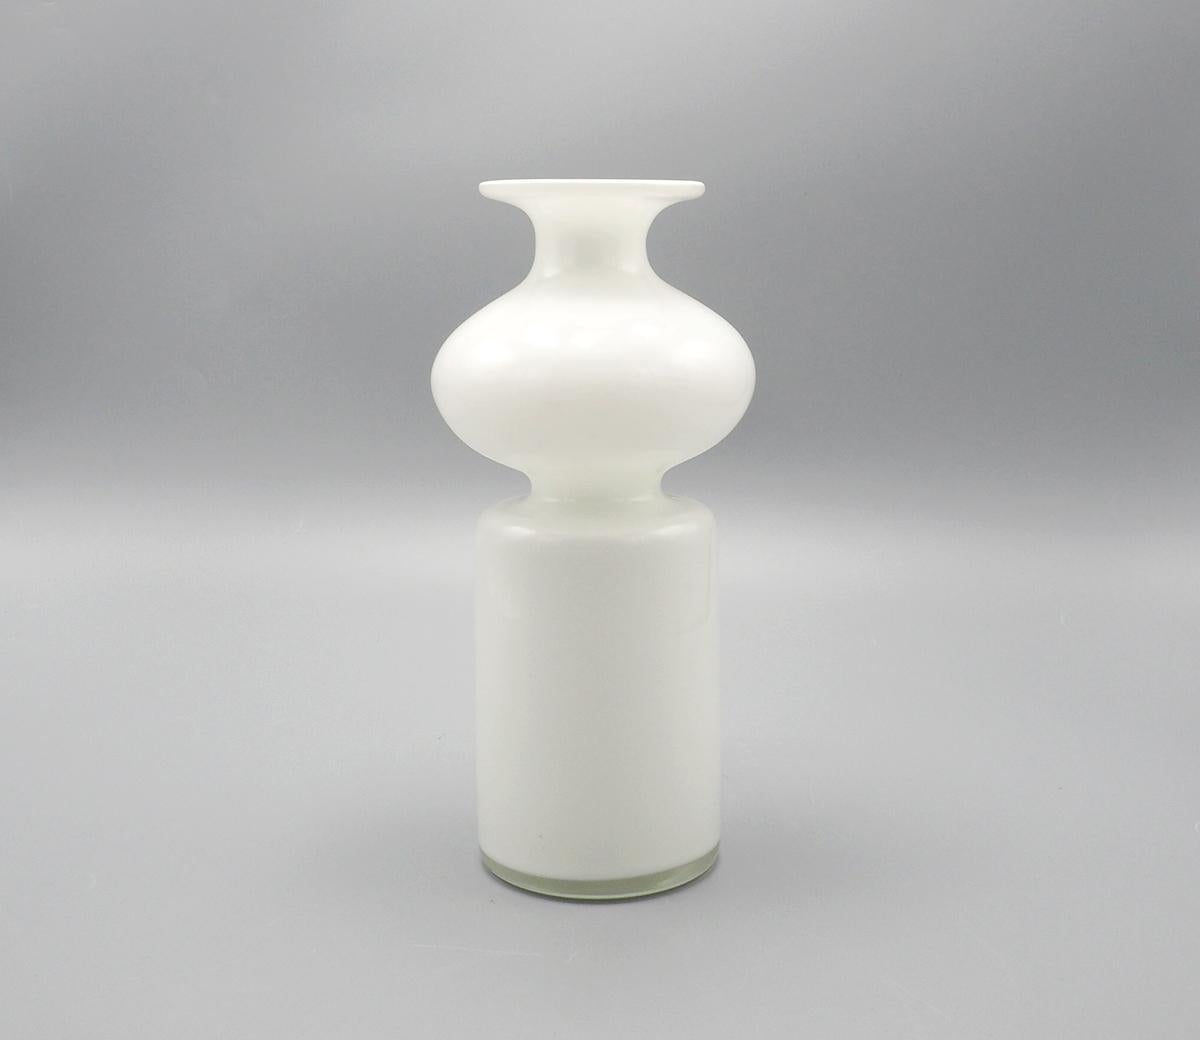 Vintage glass vase produced by Holmegaard Denmark

Model Carnaby designed by Per Lütken in the 1960s.

The vase is made of double-walled white milk glass

The cylinder shape with a ball in the middle gives the vase its quirky and playful